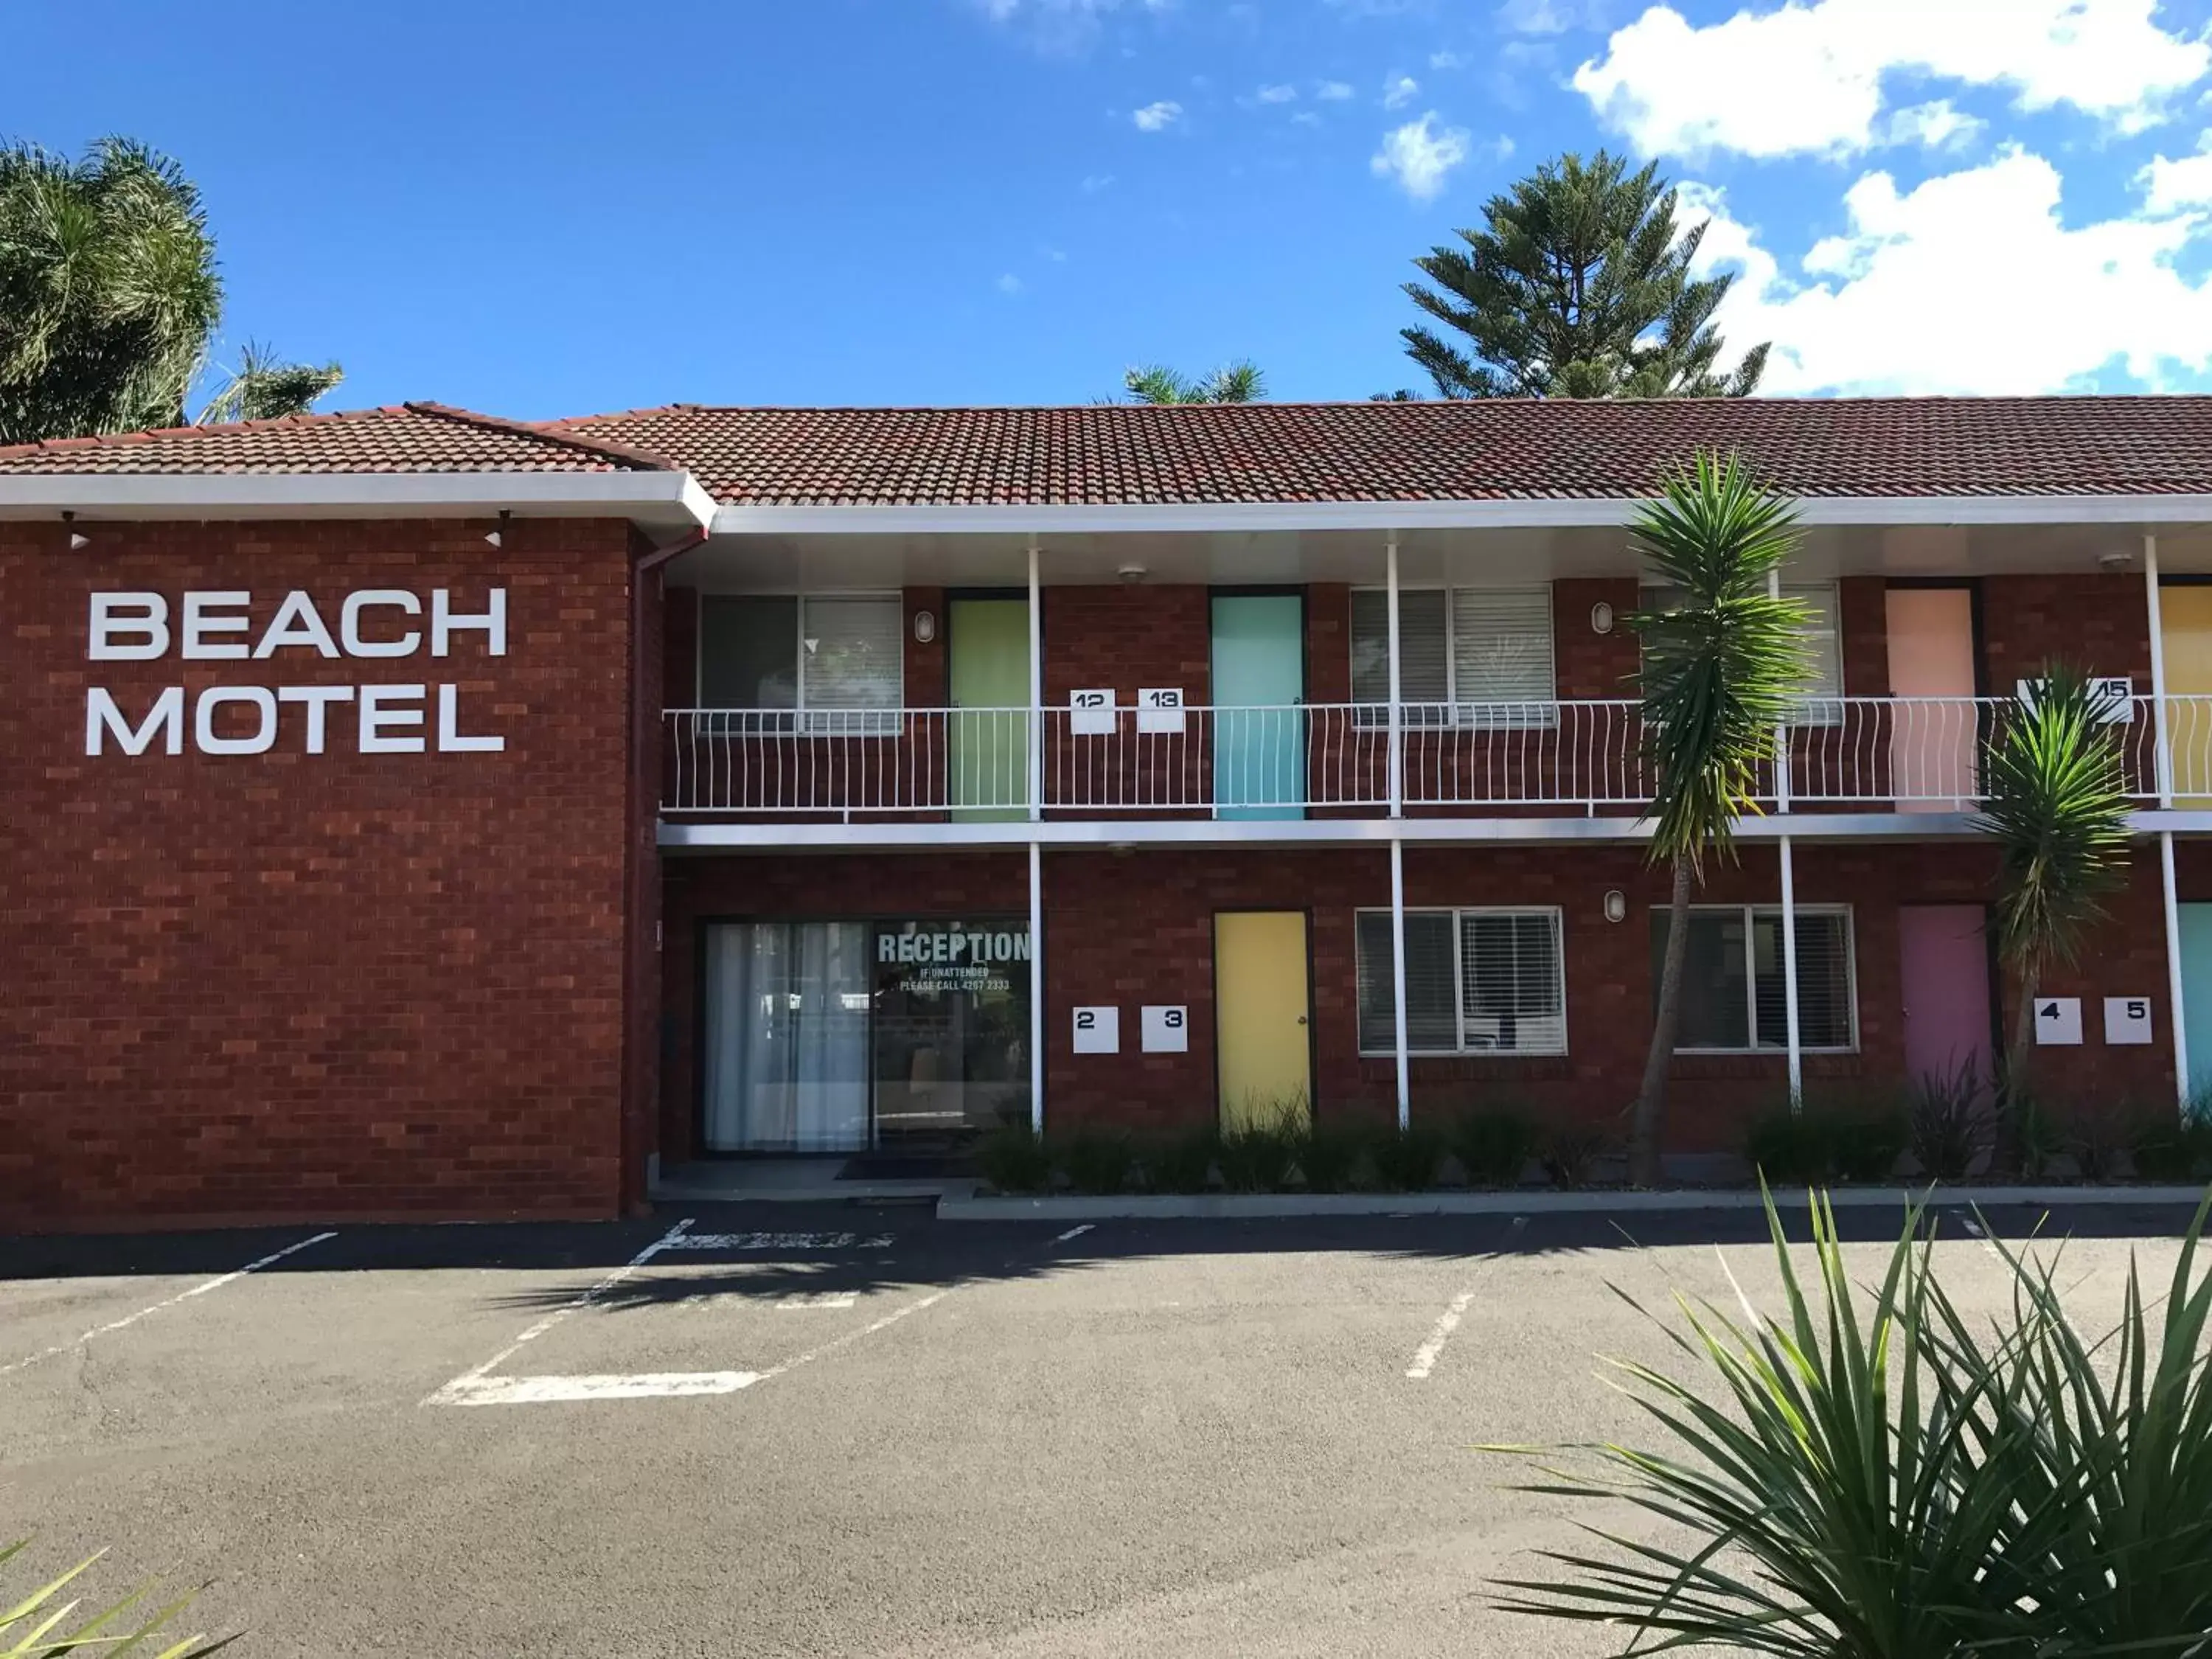 Facade/entrance, Property Building in Thirroul Beach Motel